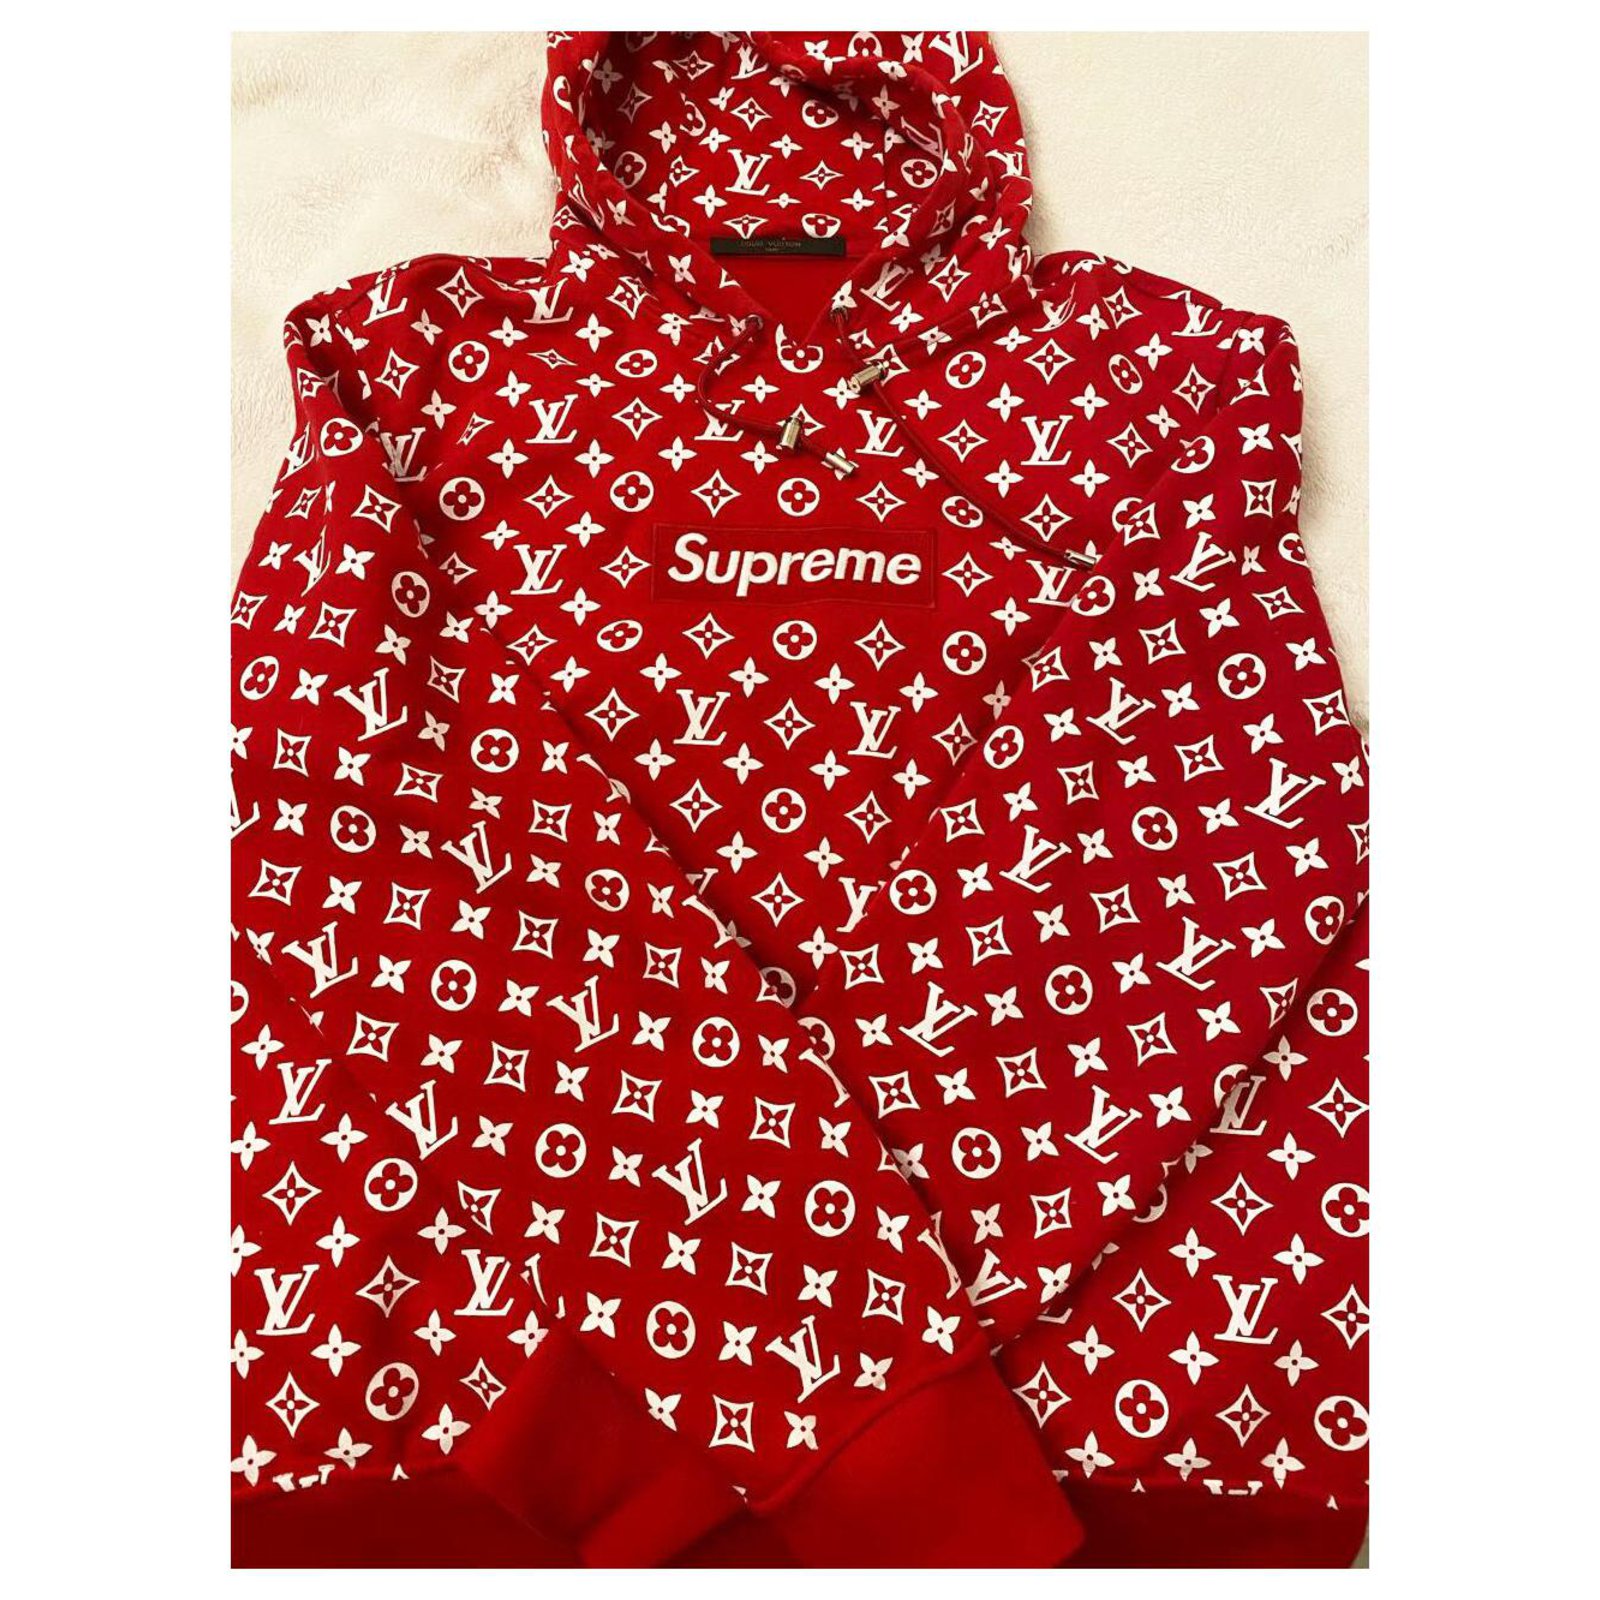 LV supreme hoodie - red – The Frenchie Shop